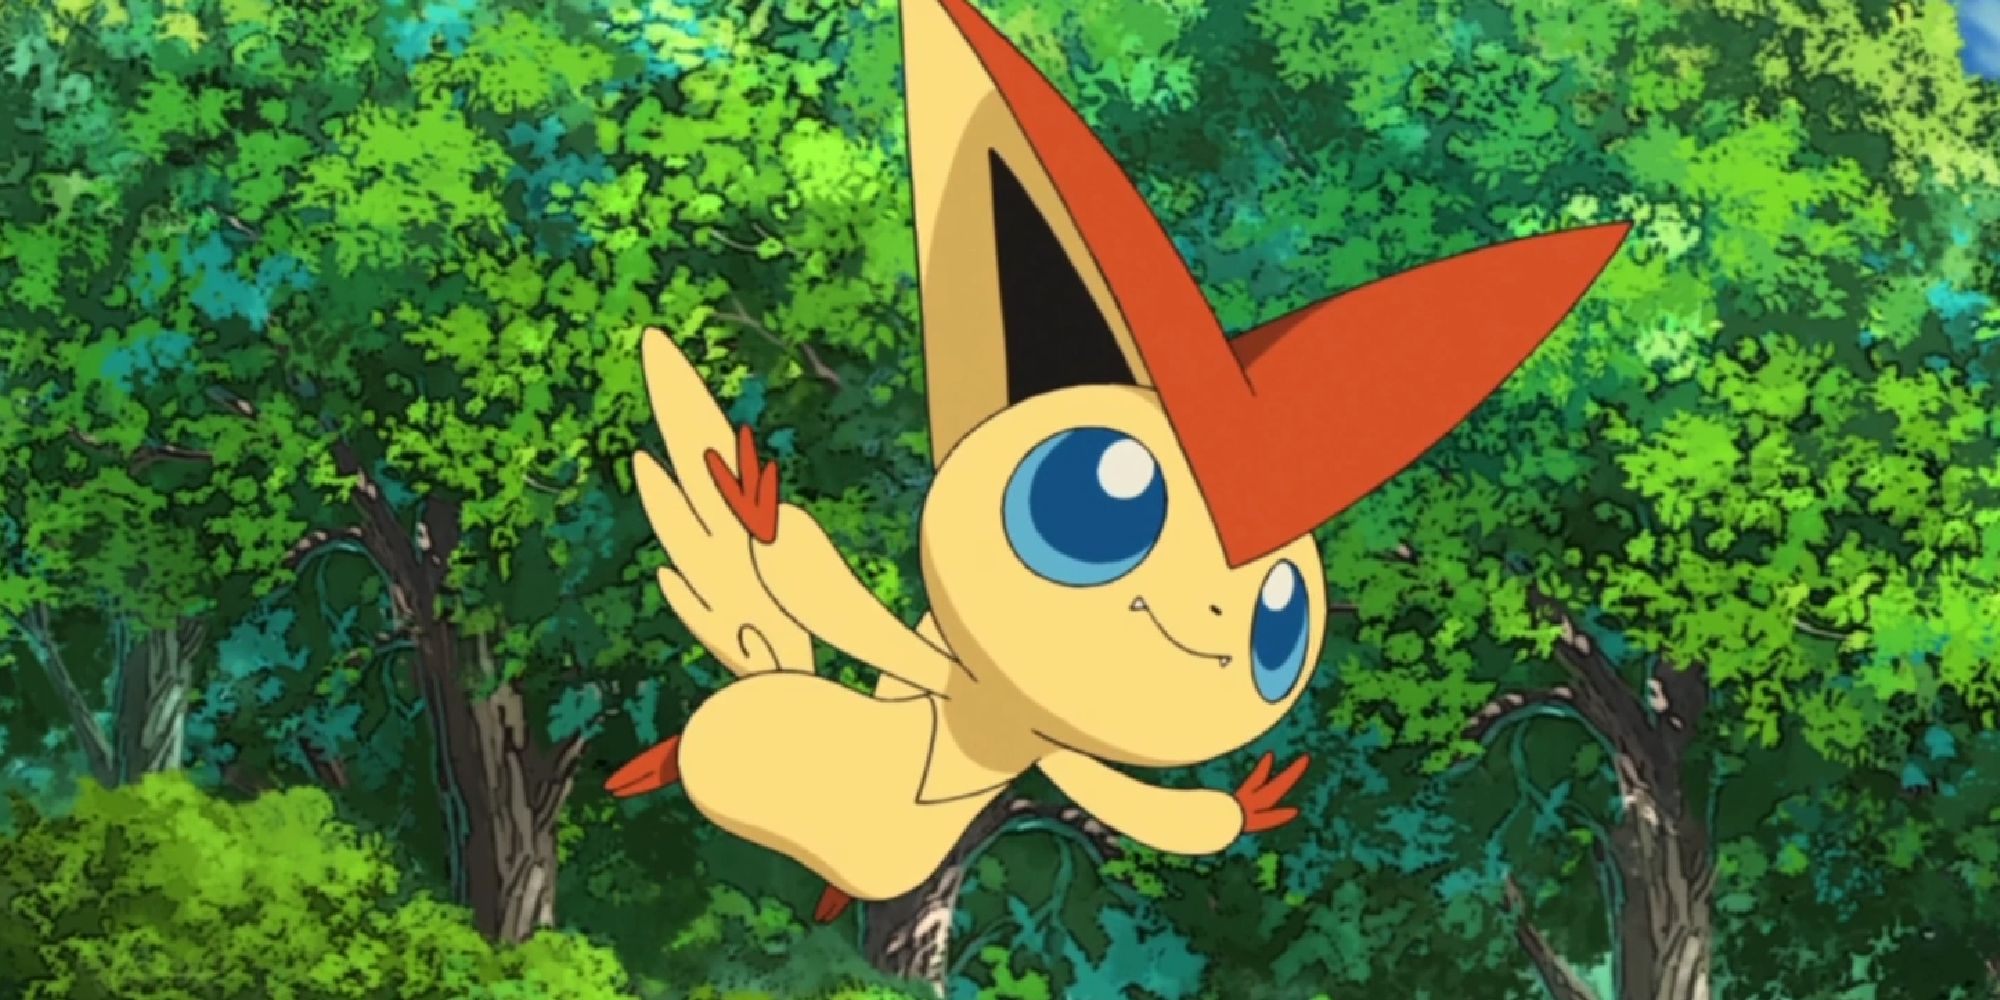 Victini flying in a forest in a Pokemon movie